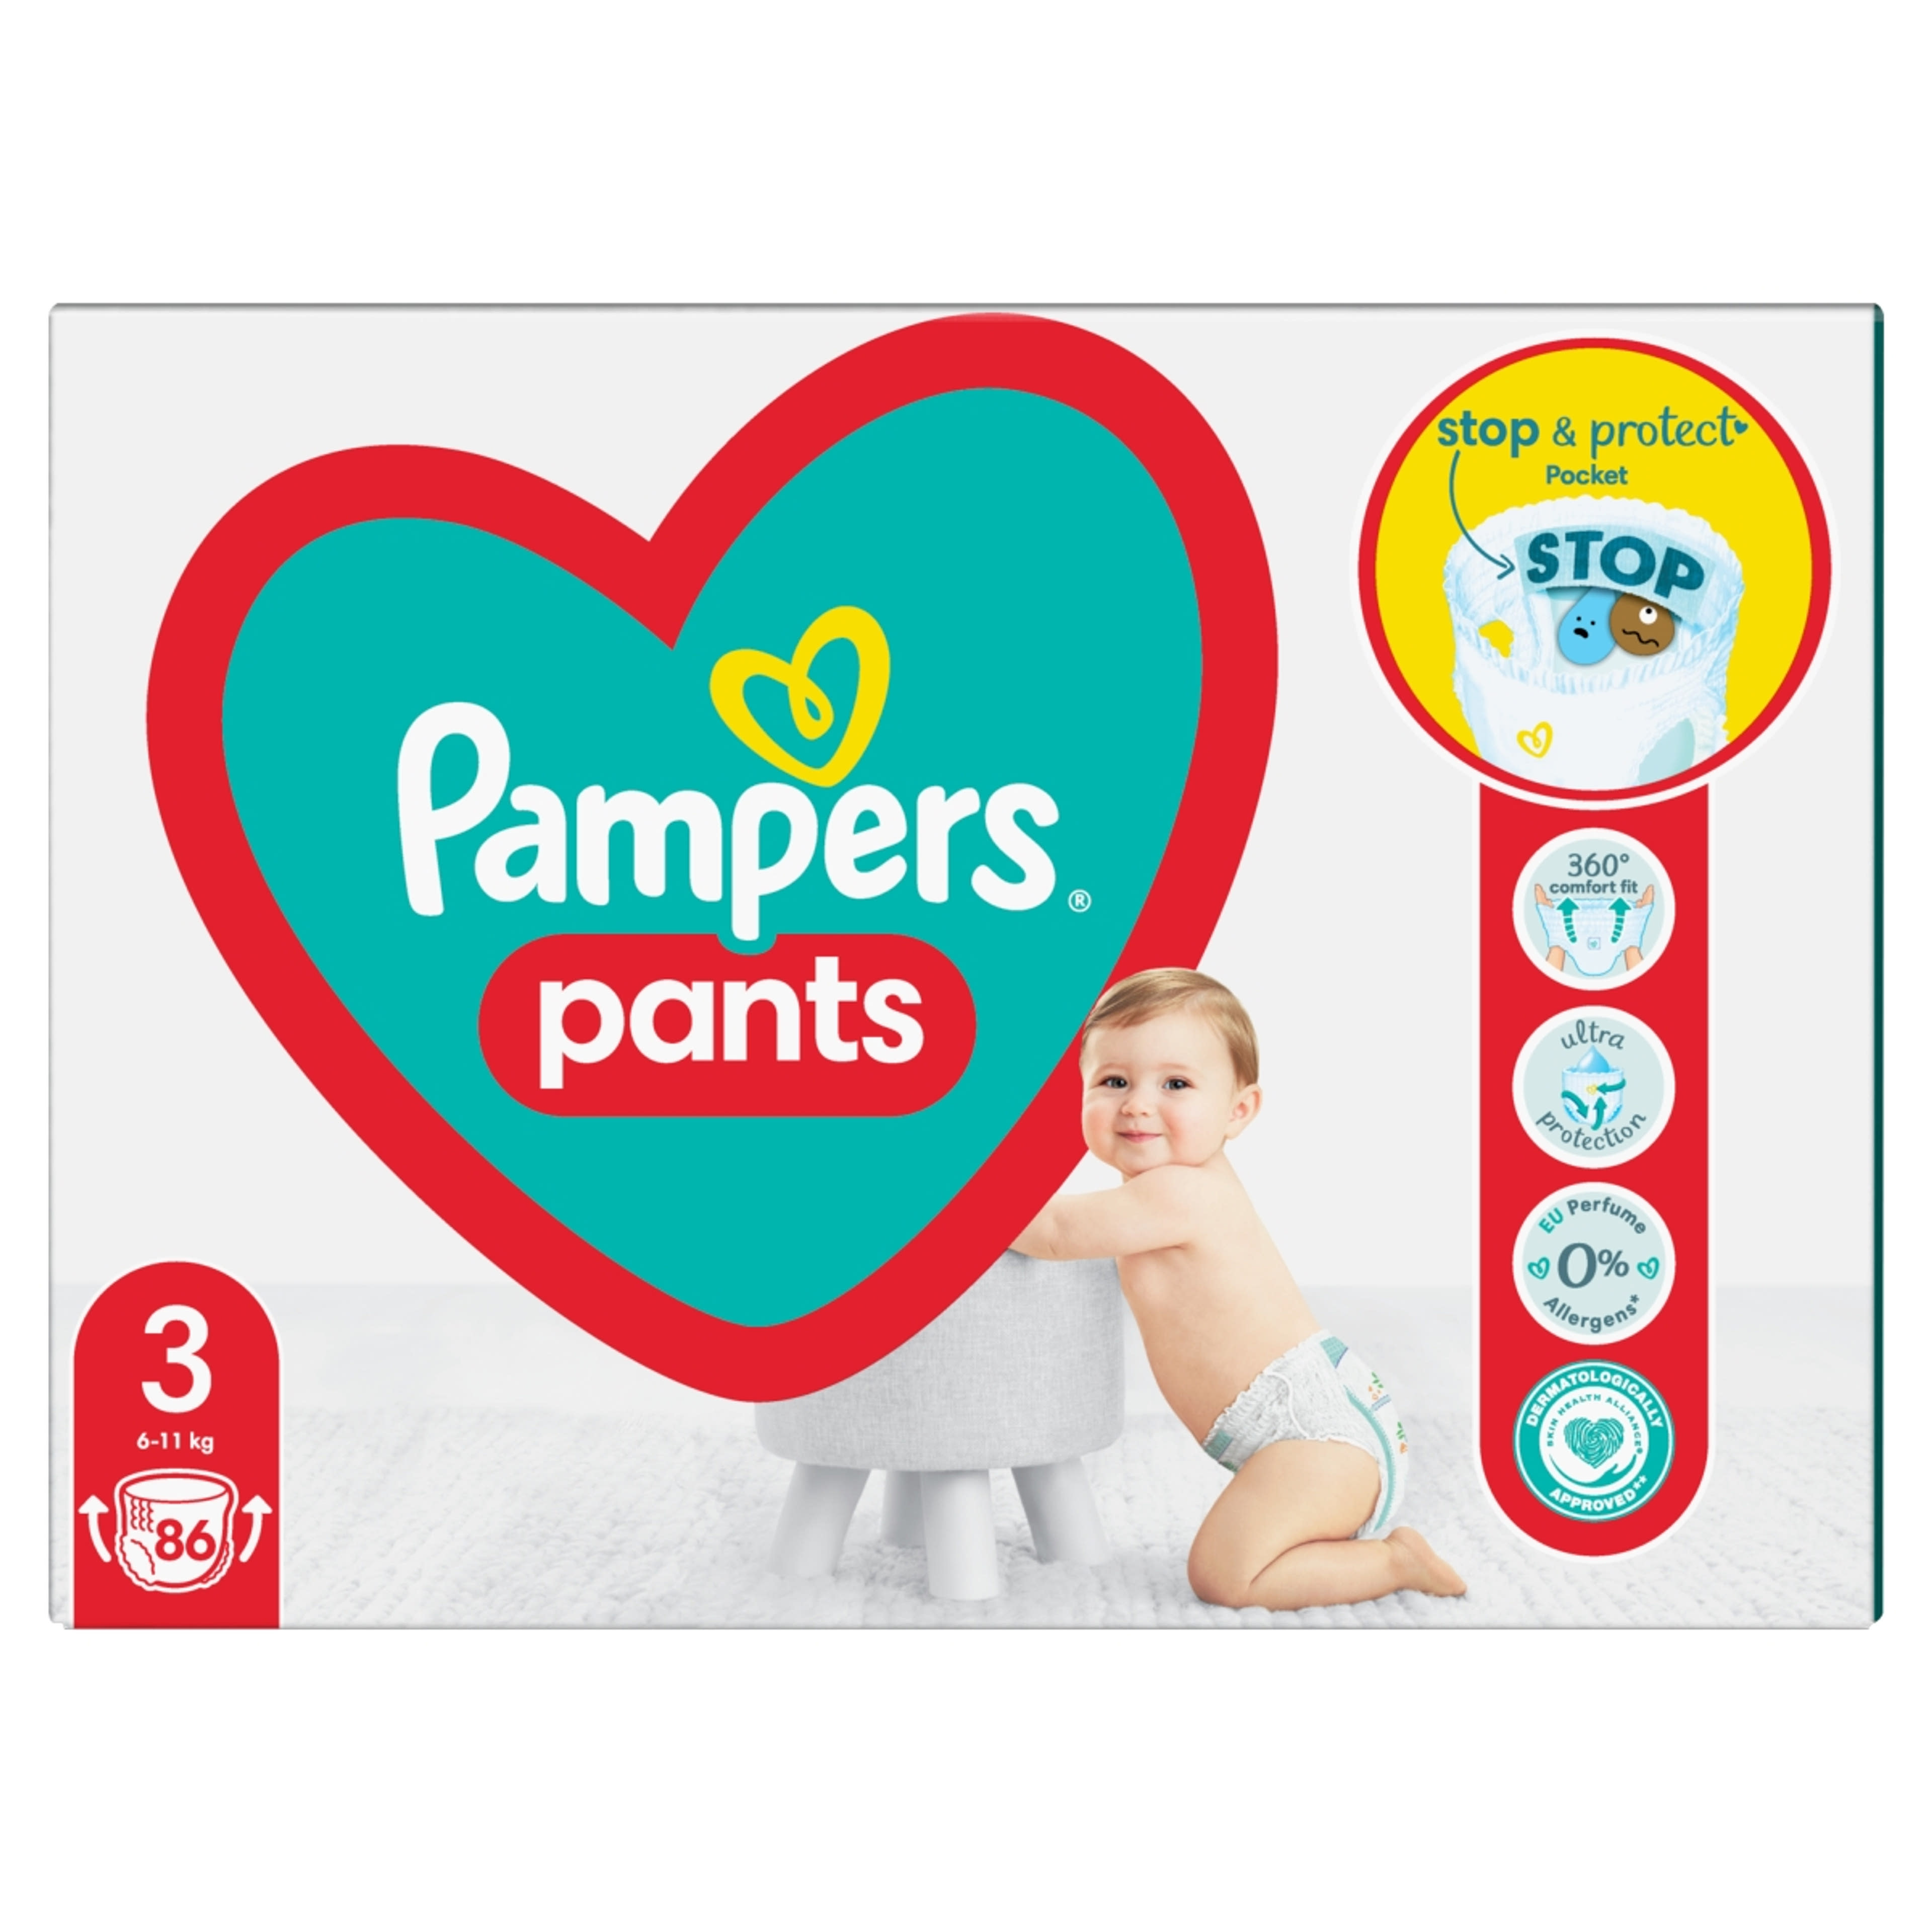 Pampers Pants Giant Pack+ 3-as 6-11 kg - 86 db-3